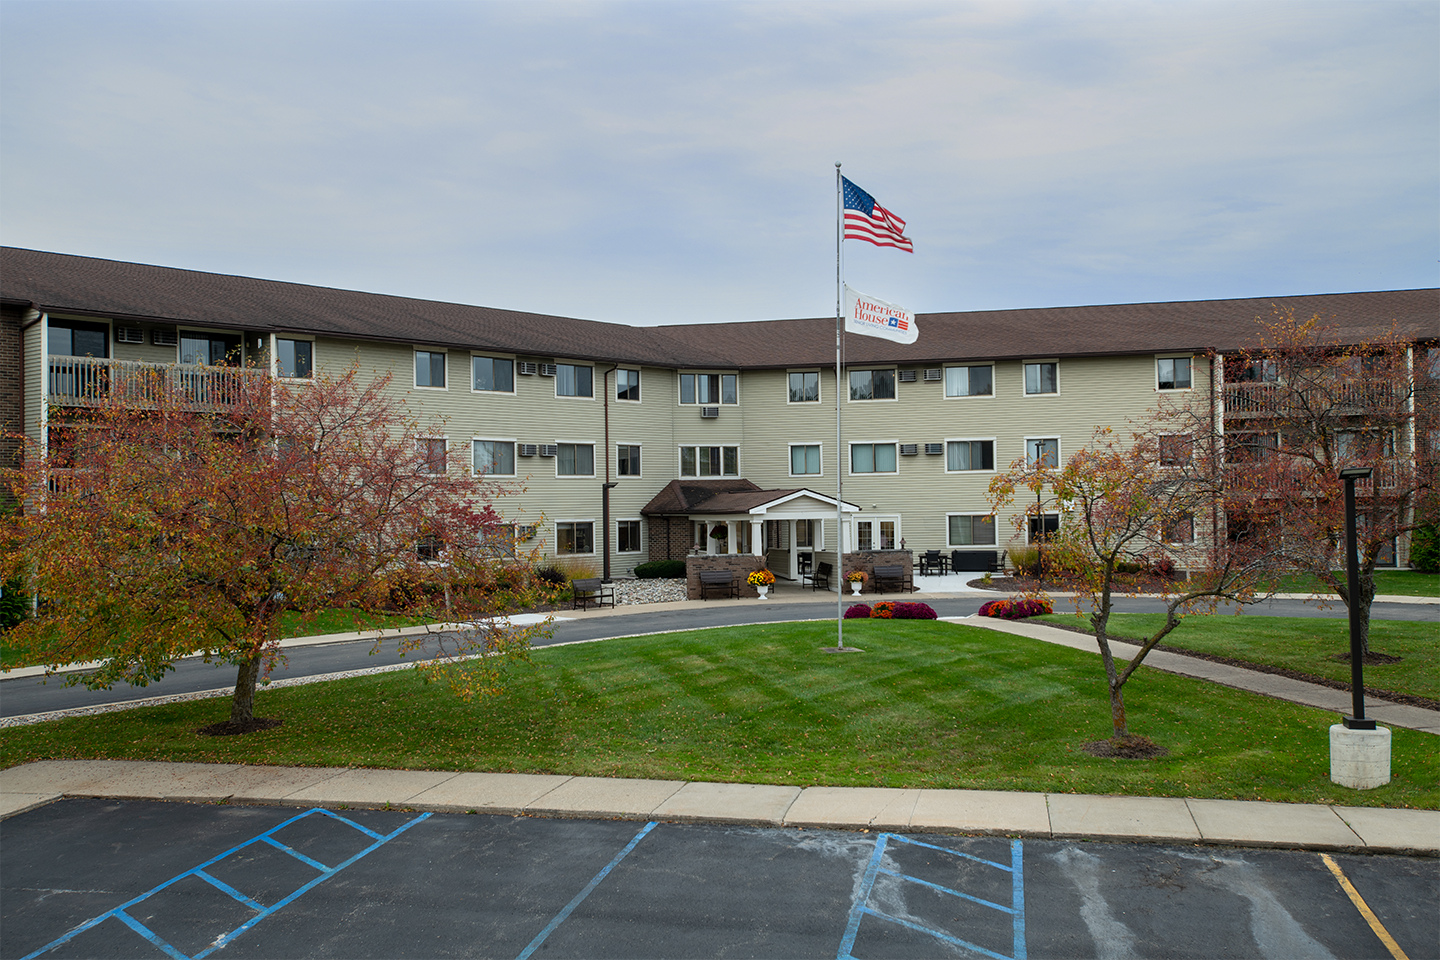 Exterior of American House Grand Blanc, a retirement community in Grand Blanc, Michigan.